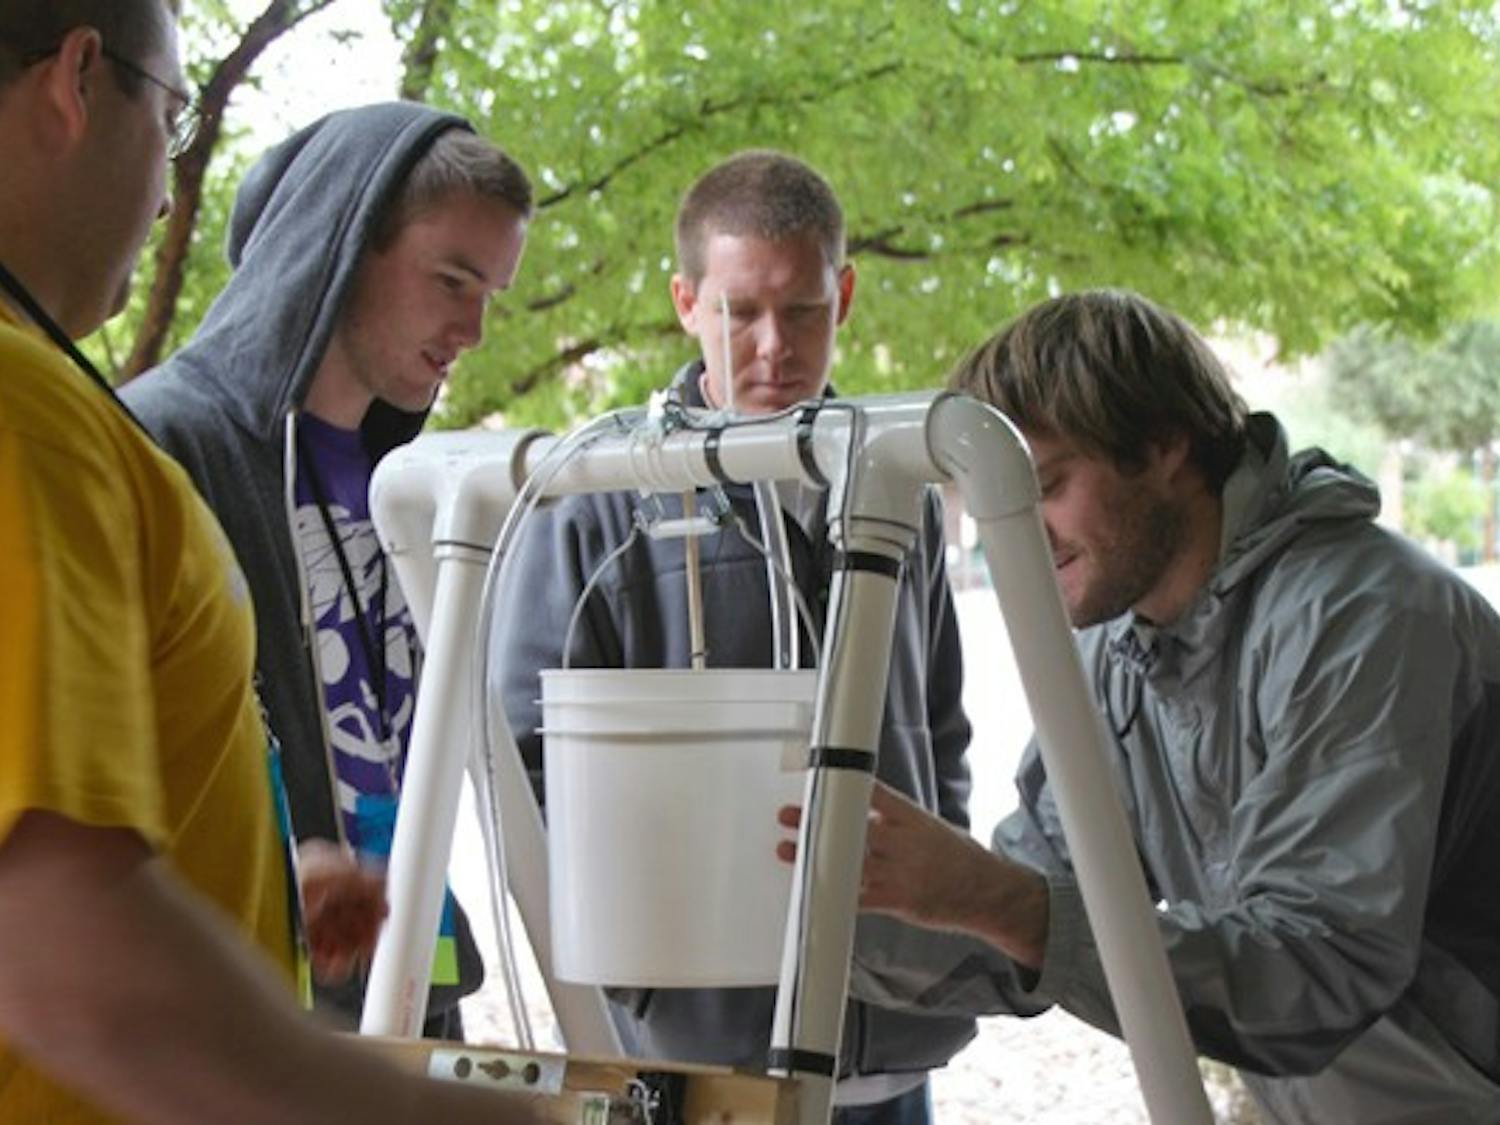 SOLAR SCRIMMAGE: ASU students Nathan Bakken, Trever Fleetham, Jeremy Ecton and Tyler Fleetham (left to right) won a competition to design, build, test and present the best overall solar-powered water pumping system at the Avnet Tech Games that took place at the University of Advancing Technologies on Saturday. (Photo by Rosie Gochnour)